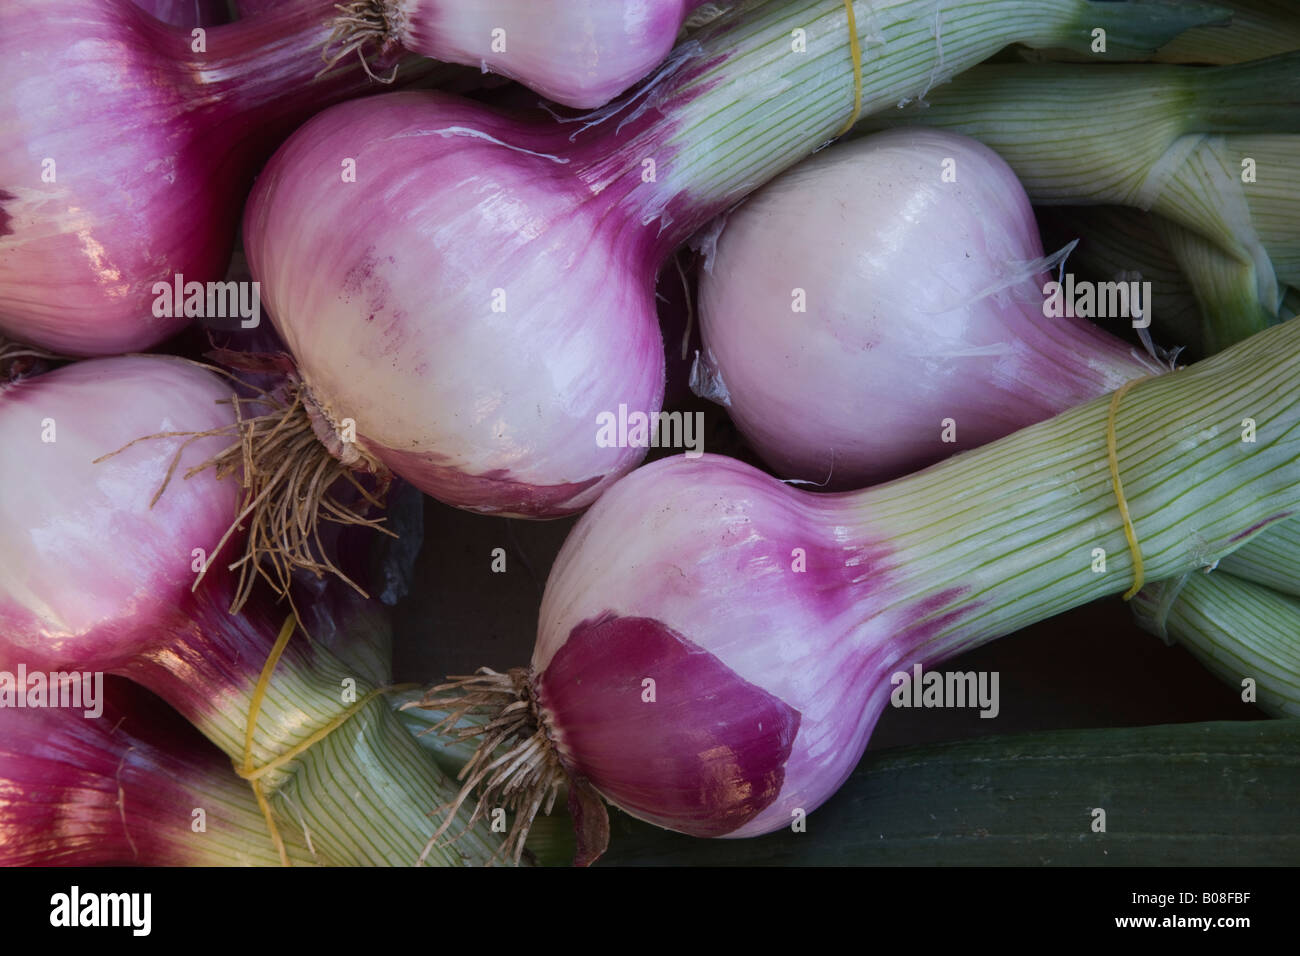 Red Onions. Stock Photo